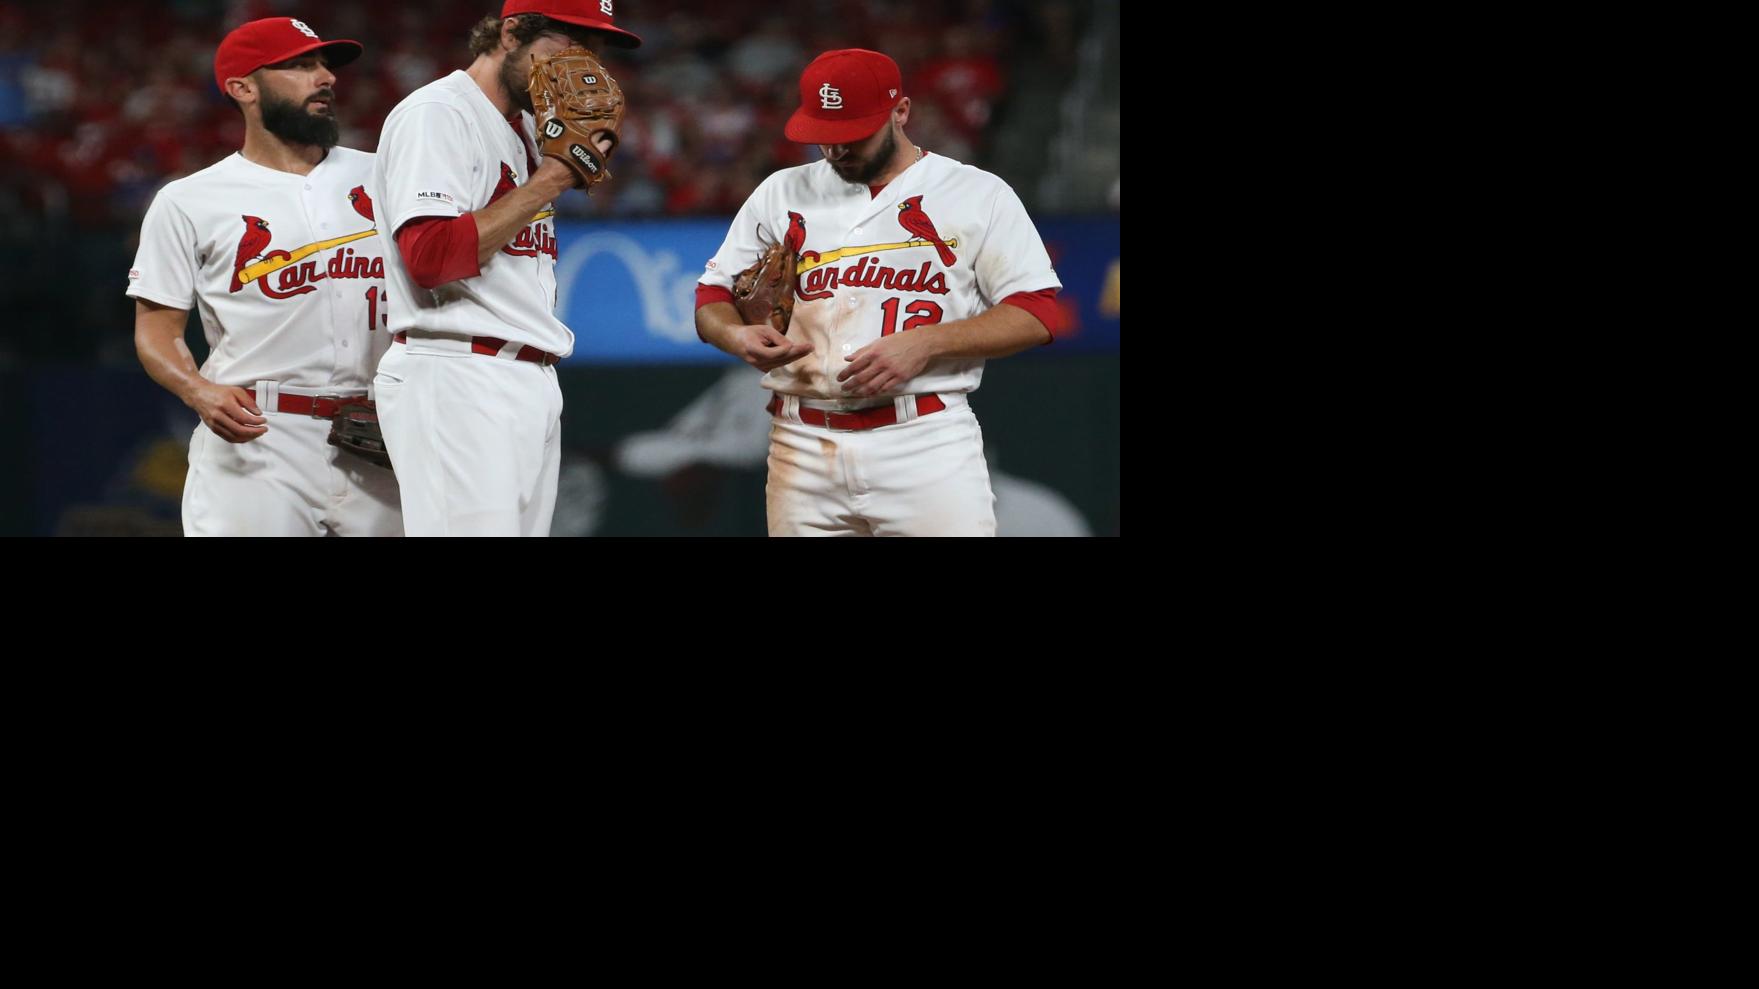 St. Louis Cardinals lose to Chicago Cubs 8-2, magic number is now 2 | St. Louis Cardinals ...